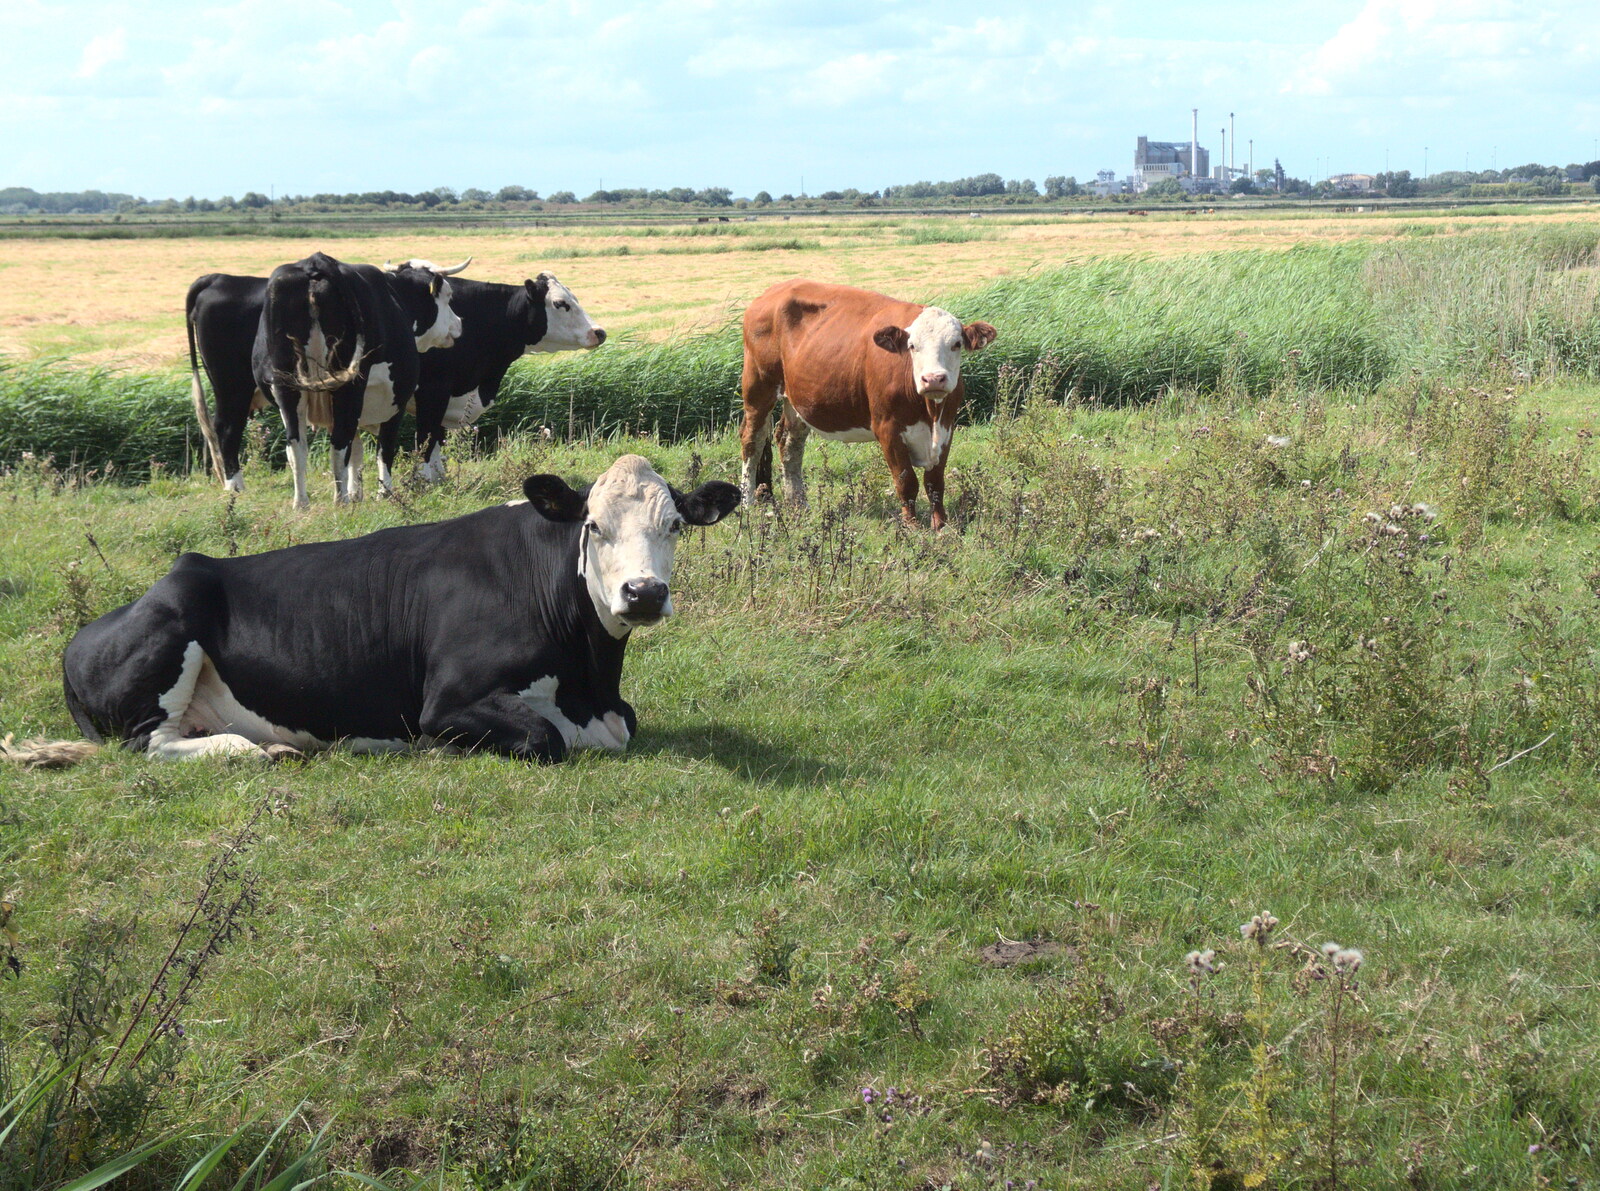 Cows, and the Cantley sugar factory in the distance from The Humpty Dumpty Beer Festival, Reedham, Norfolk - 22nd July 2017